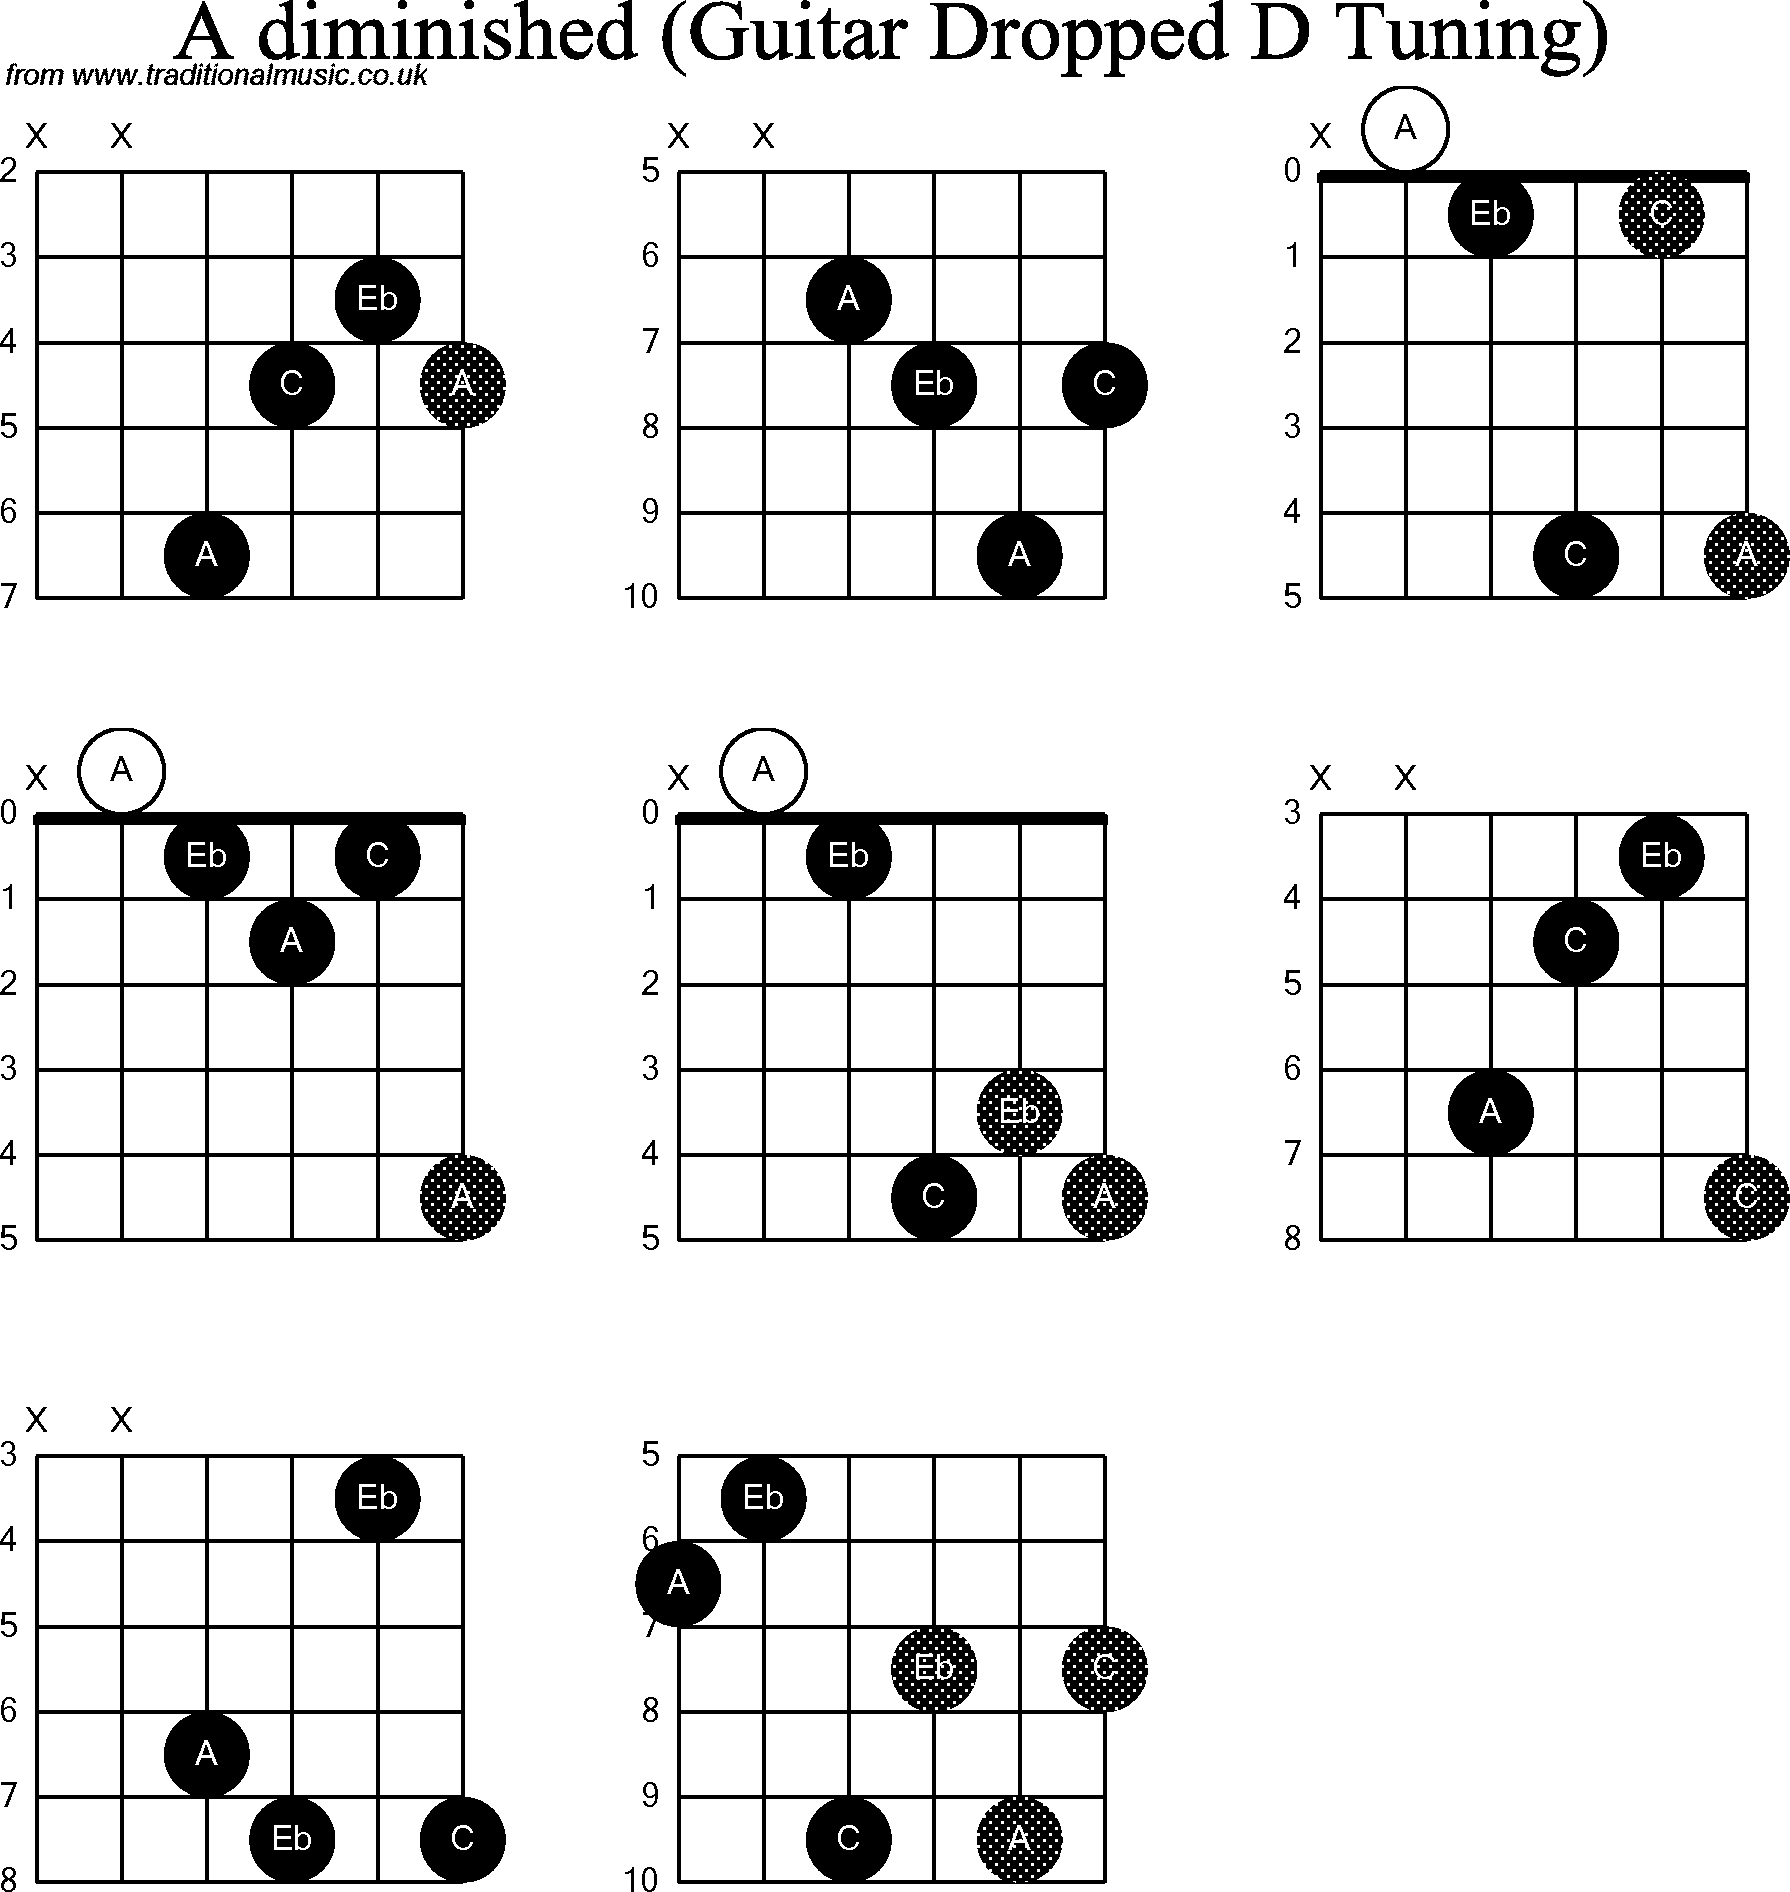 Chord diagrams for dropped D Guitar(DADGBE), A Diminished